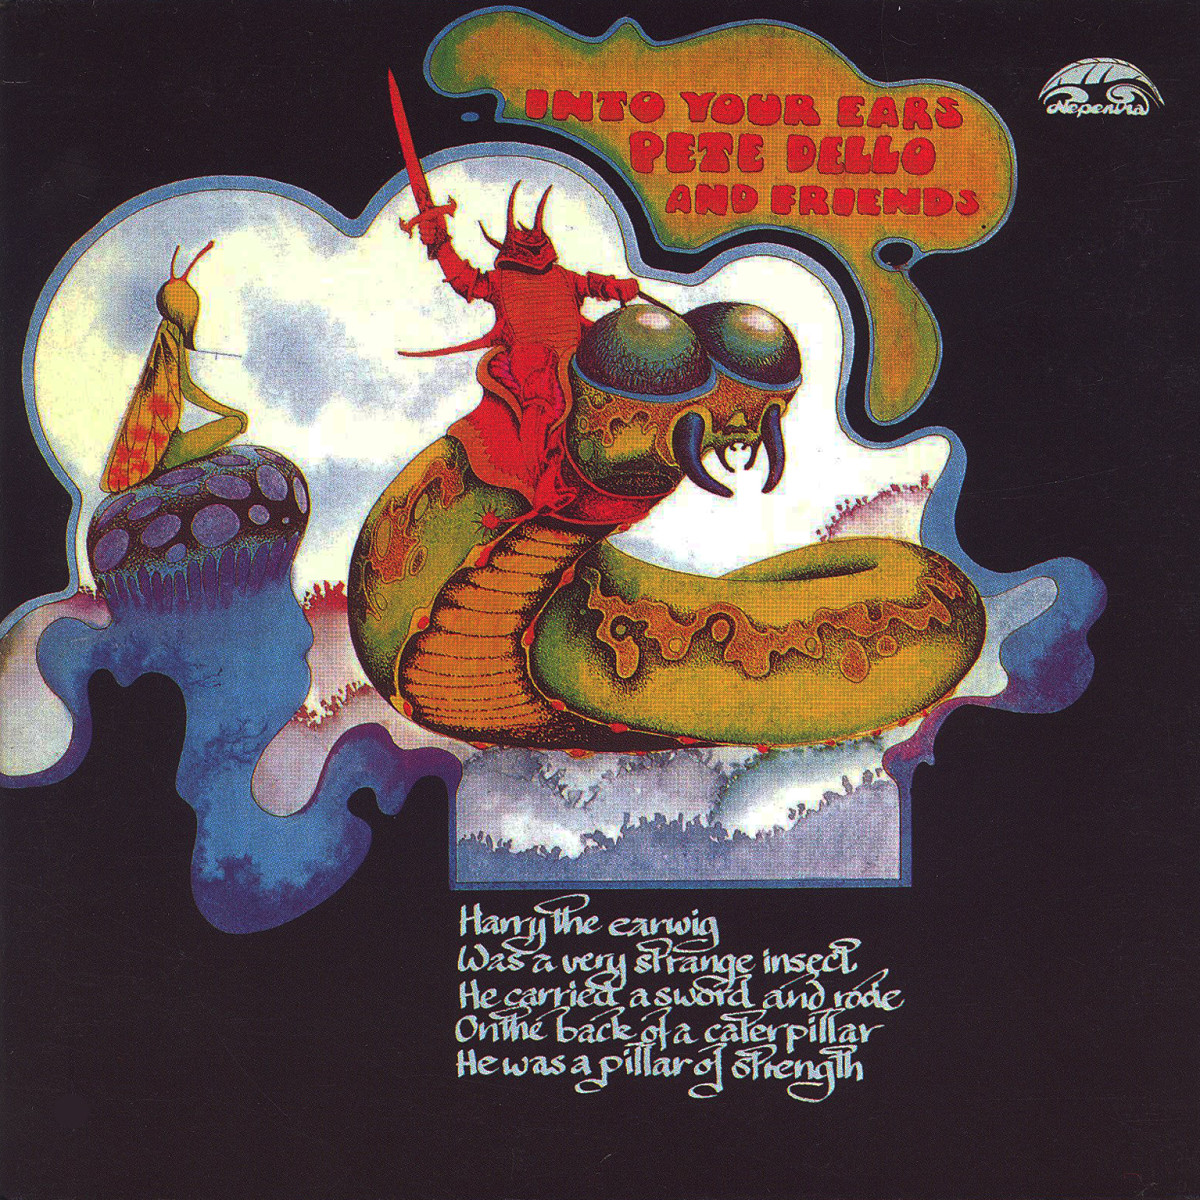 Pete Dello and Friends "Into Your Ears"  ‎Nepentha 6437001 12" Vinyl Record, UK Pressing (1971) Album Cover Art by Roger Dean